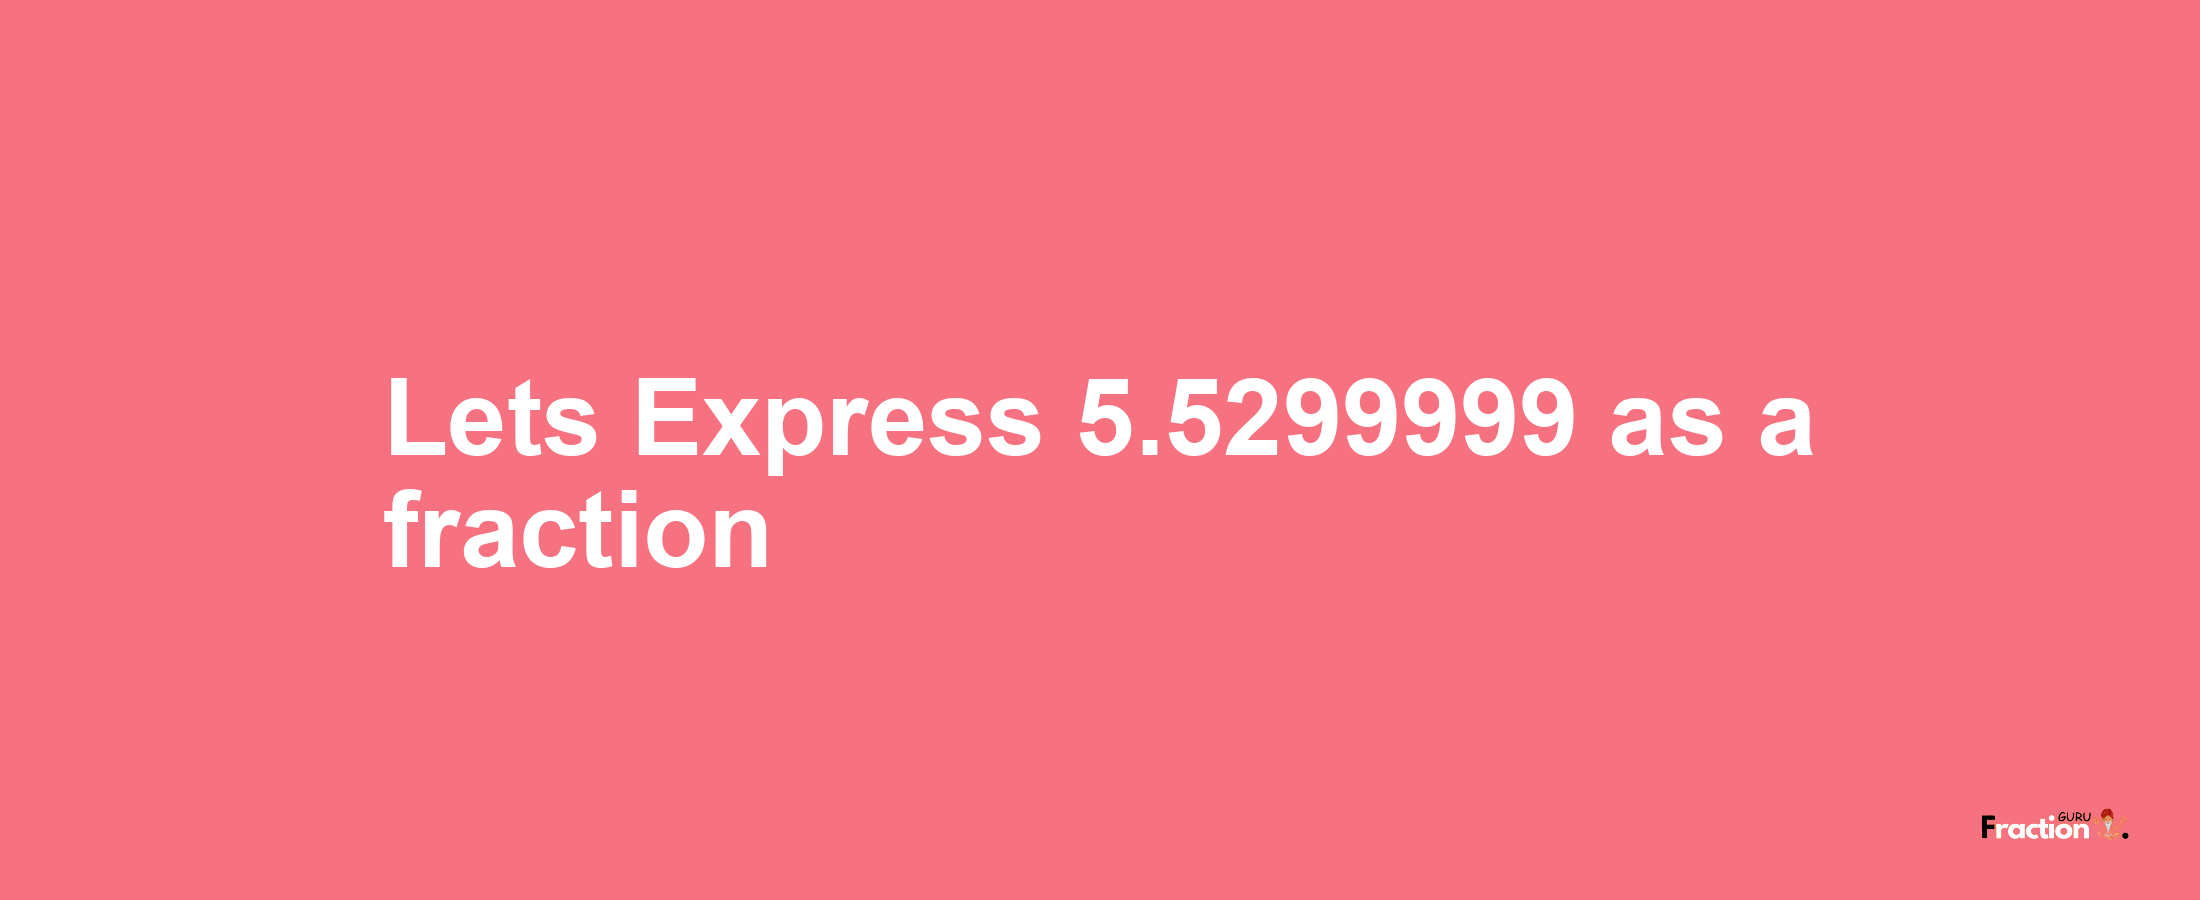 Lets Express 5.5299999 as afraction